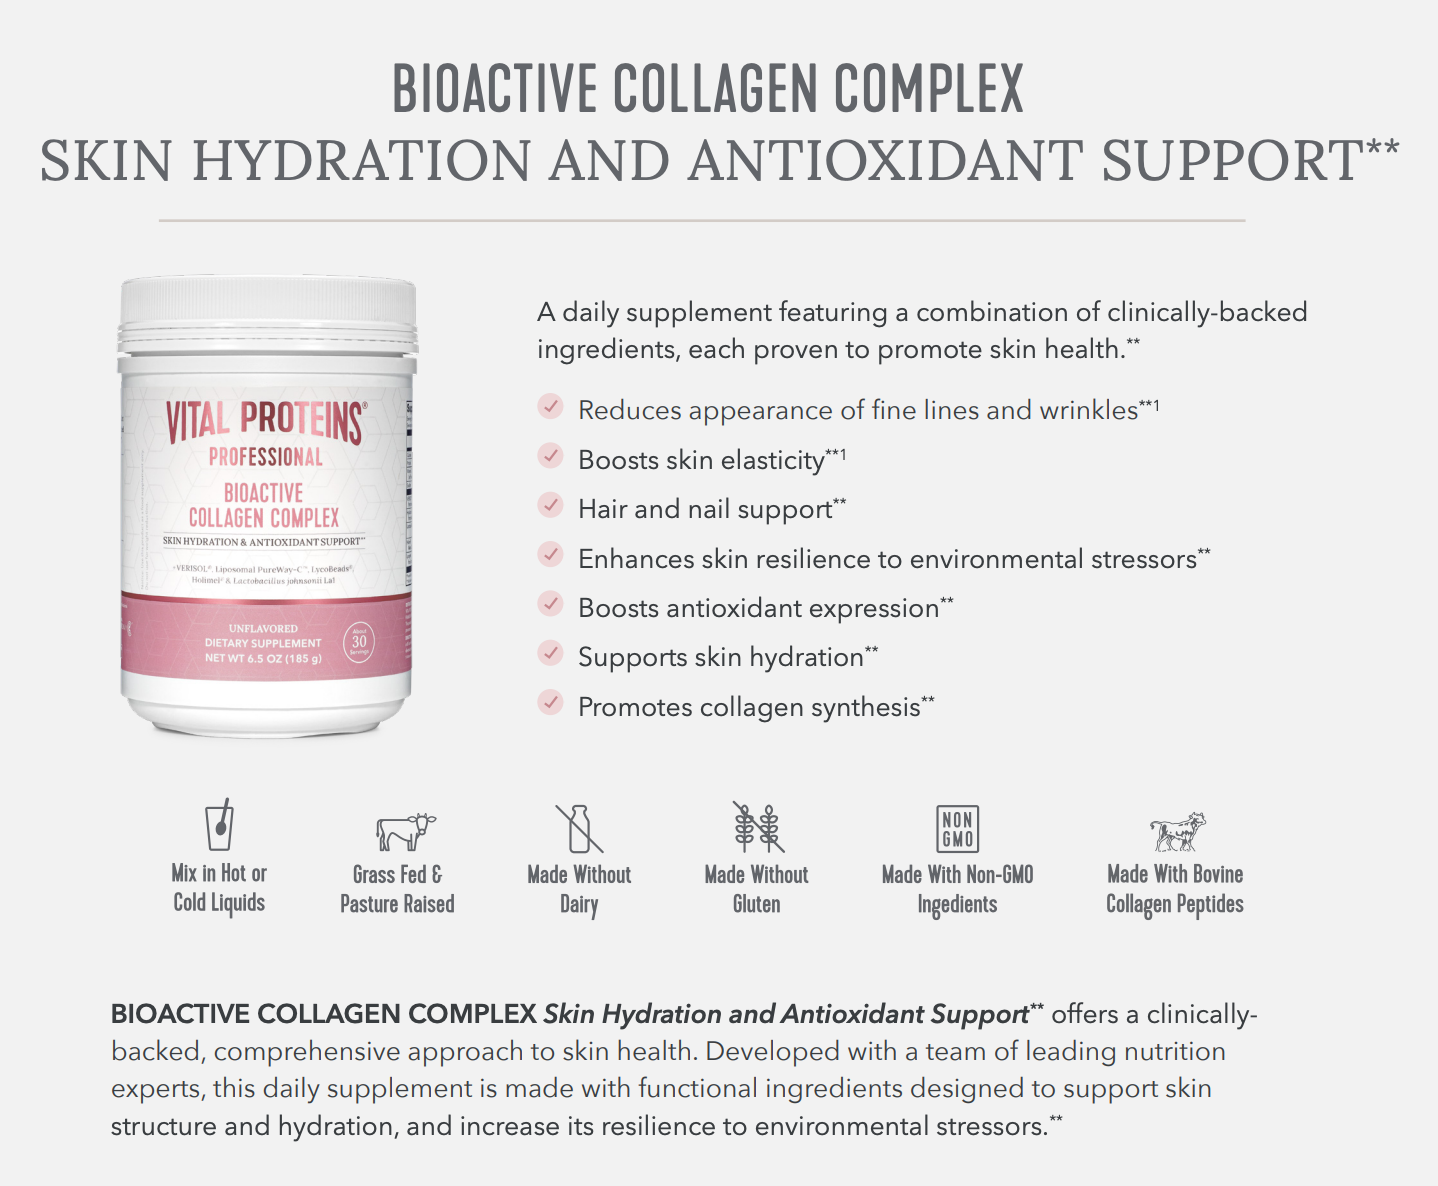 Skin Hydration & Antioxidant Support x Vital Proteins Professional®